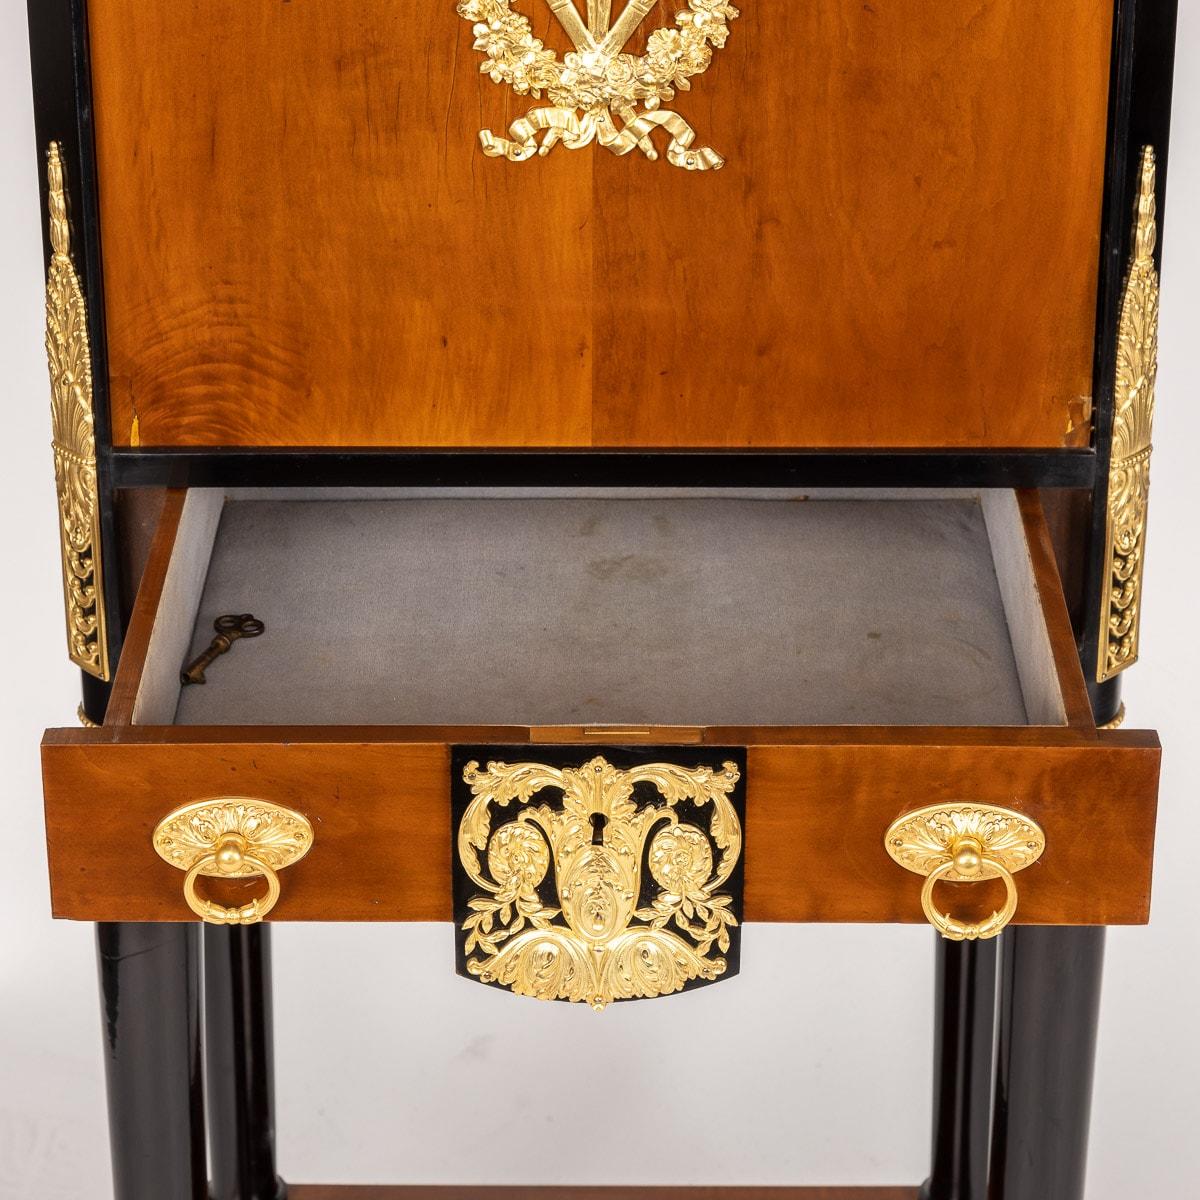 20th Century French Louis XVI Style Ormolu Cutlery Cabinet, c.1900 For Sale 12